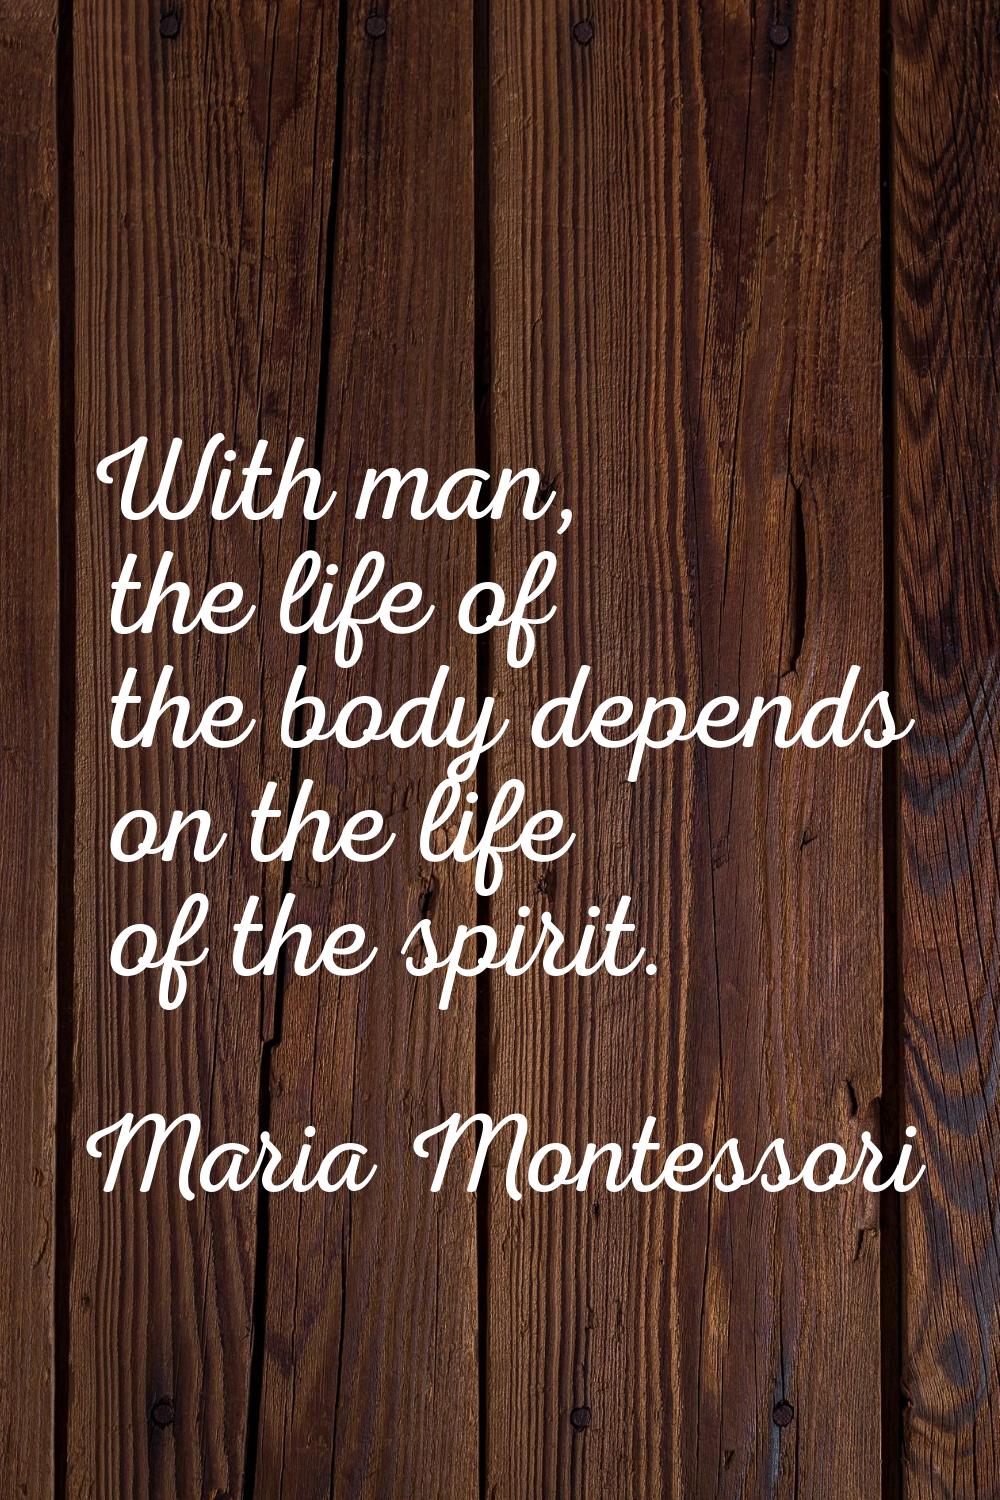 With man, the life of the body depends on the life of the spirit.